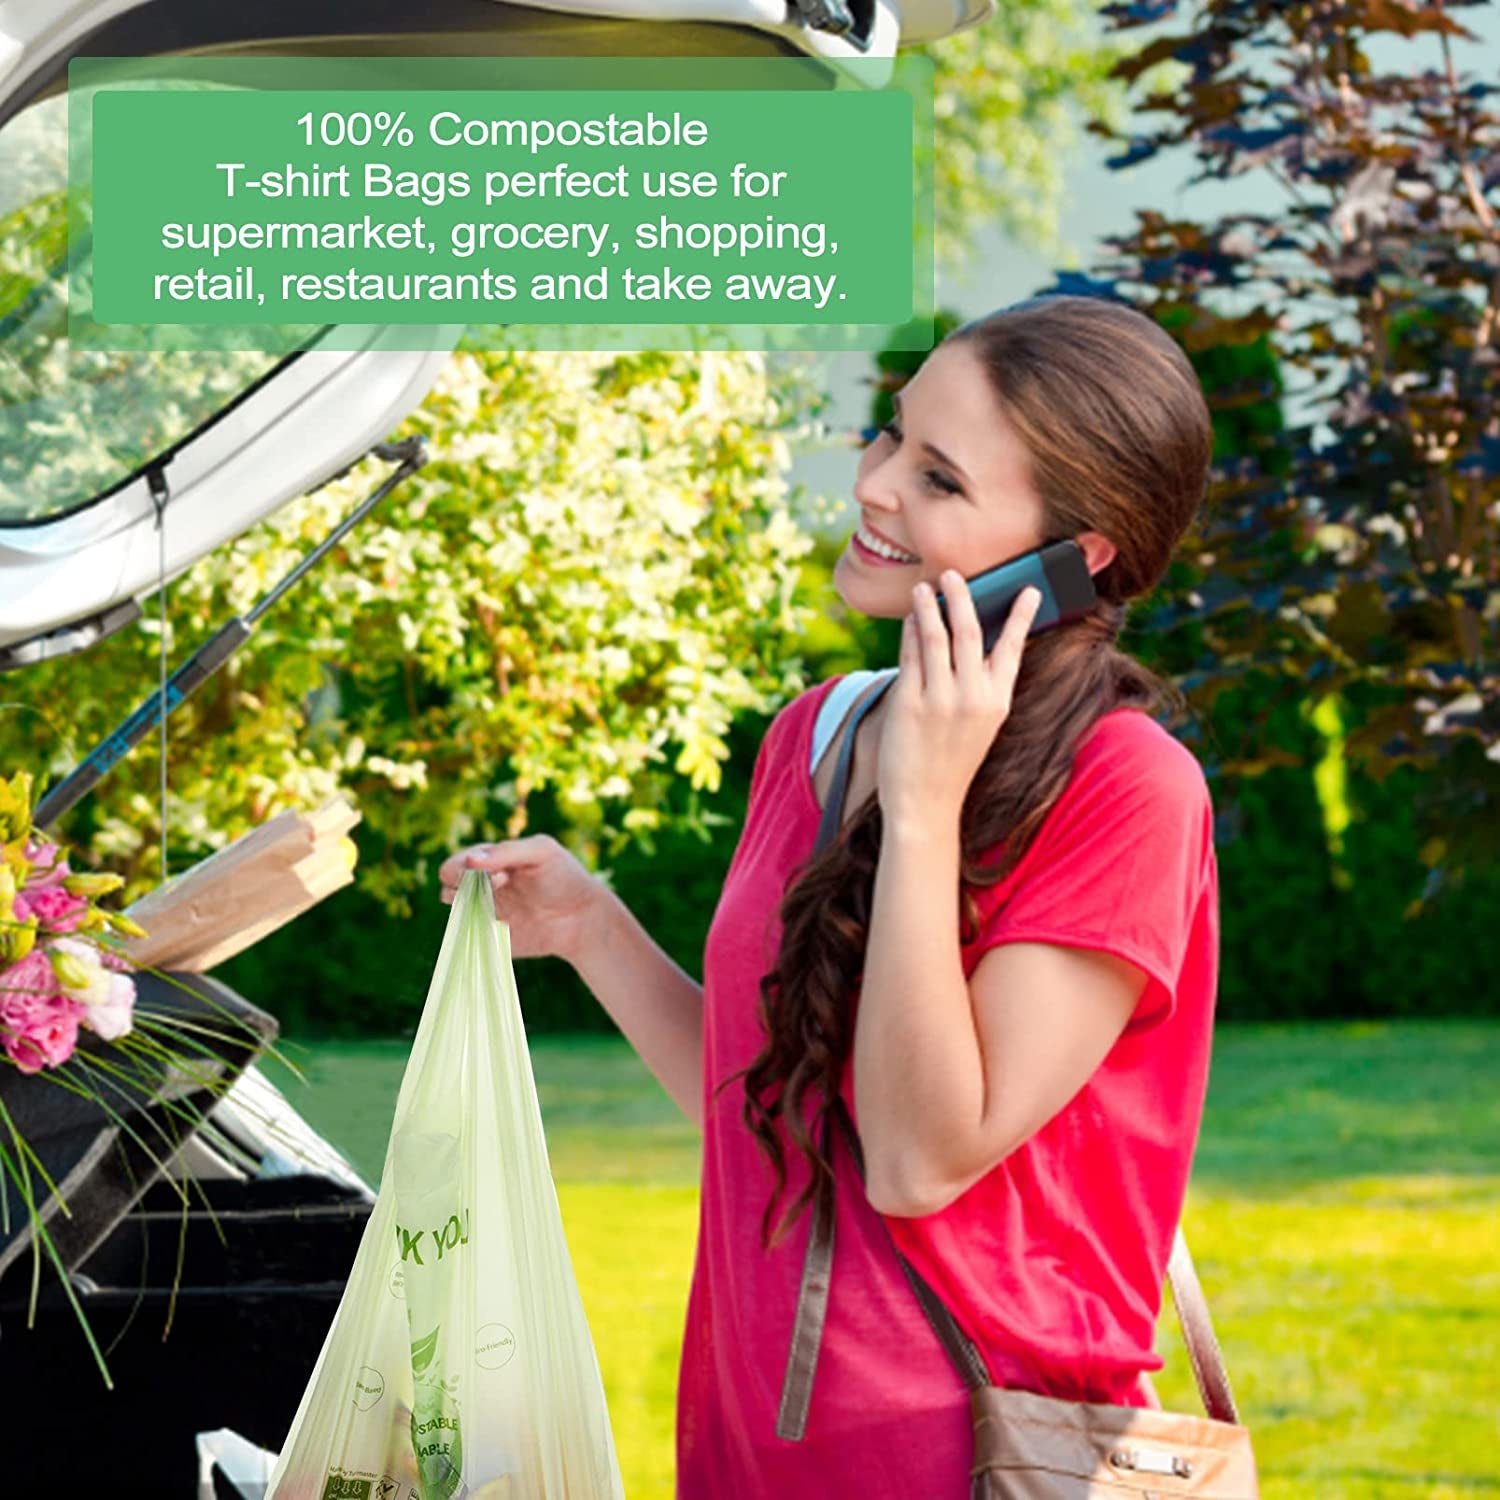 100% Compostable T-shirt Bags for Grocery Shopping